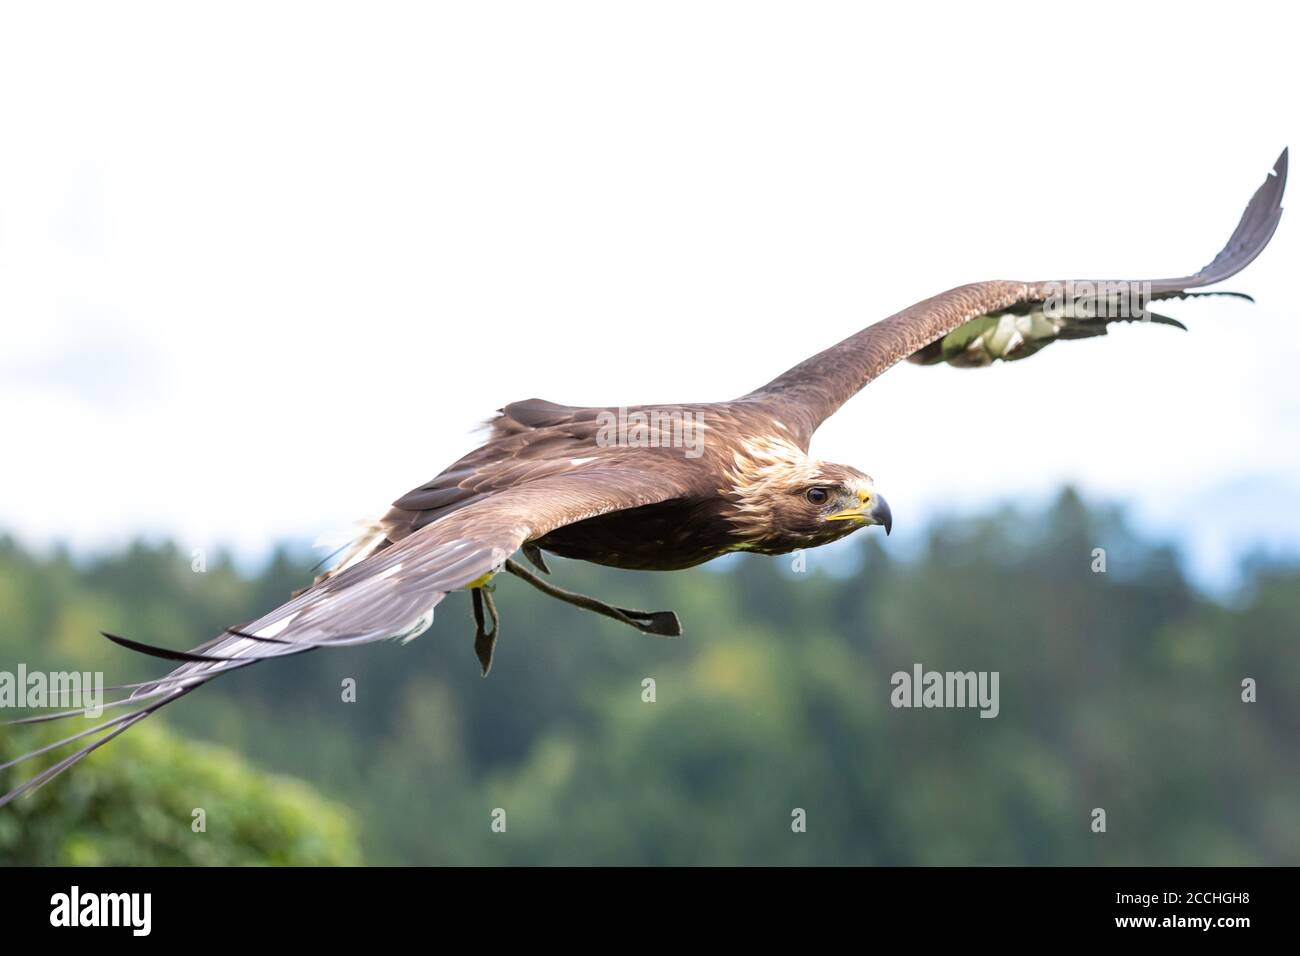 Close up of an eagle flying with its wings spread open, against a white sky and distant trees Stock Photo